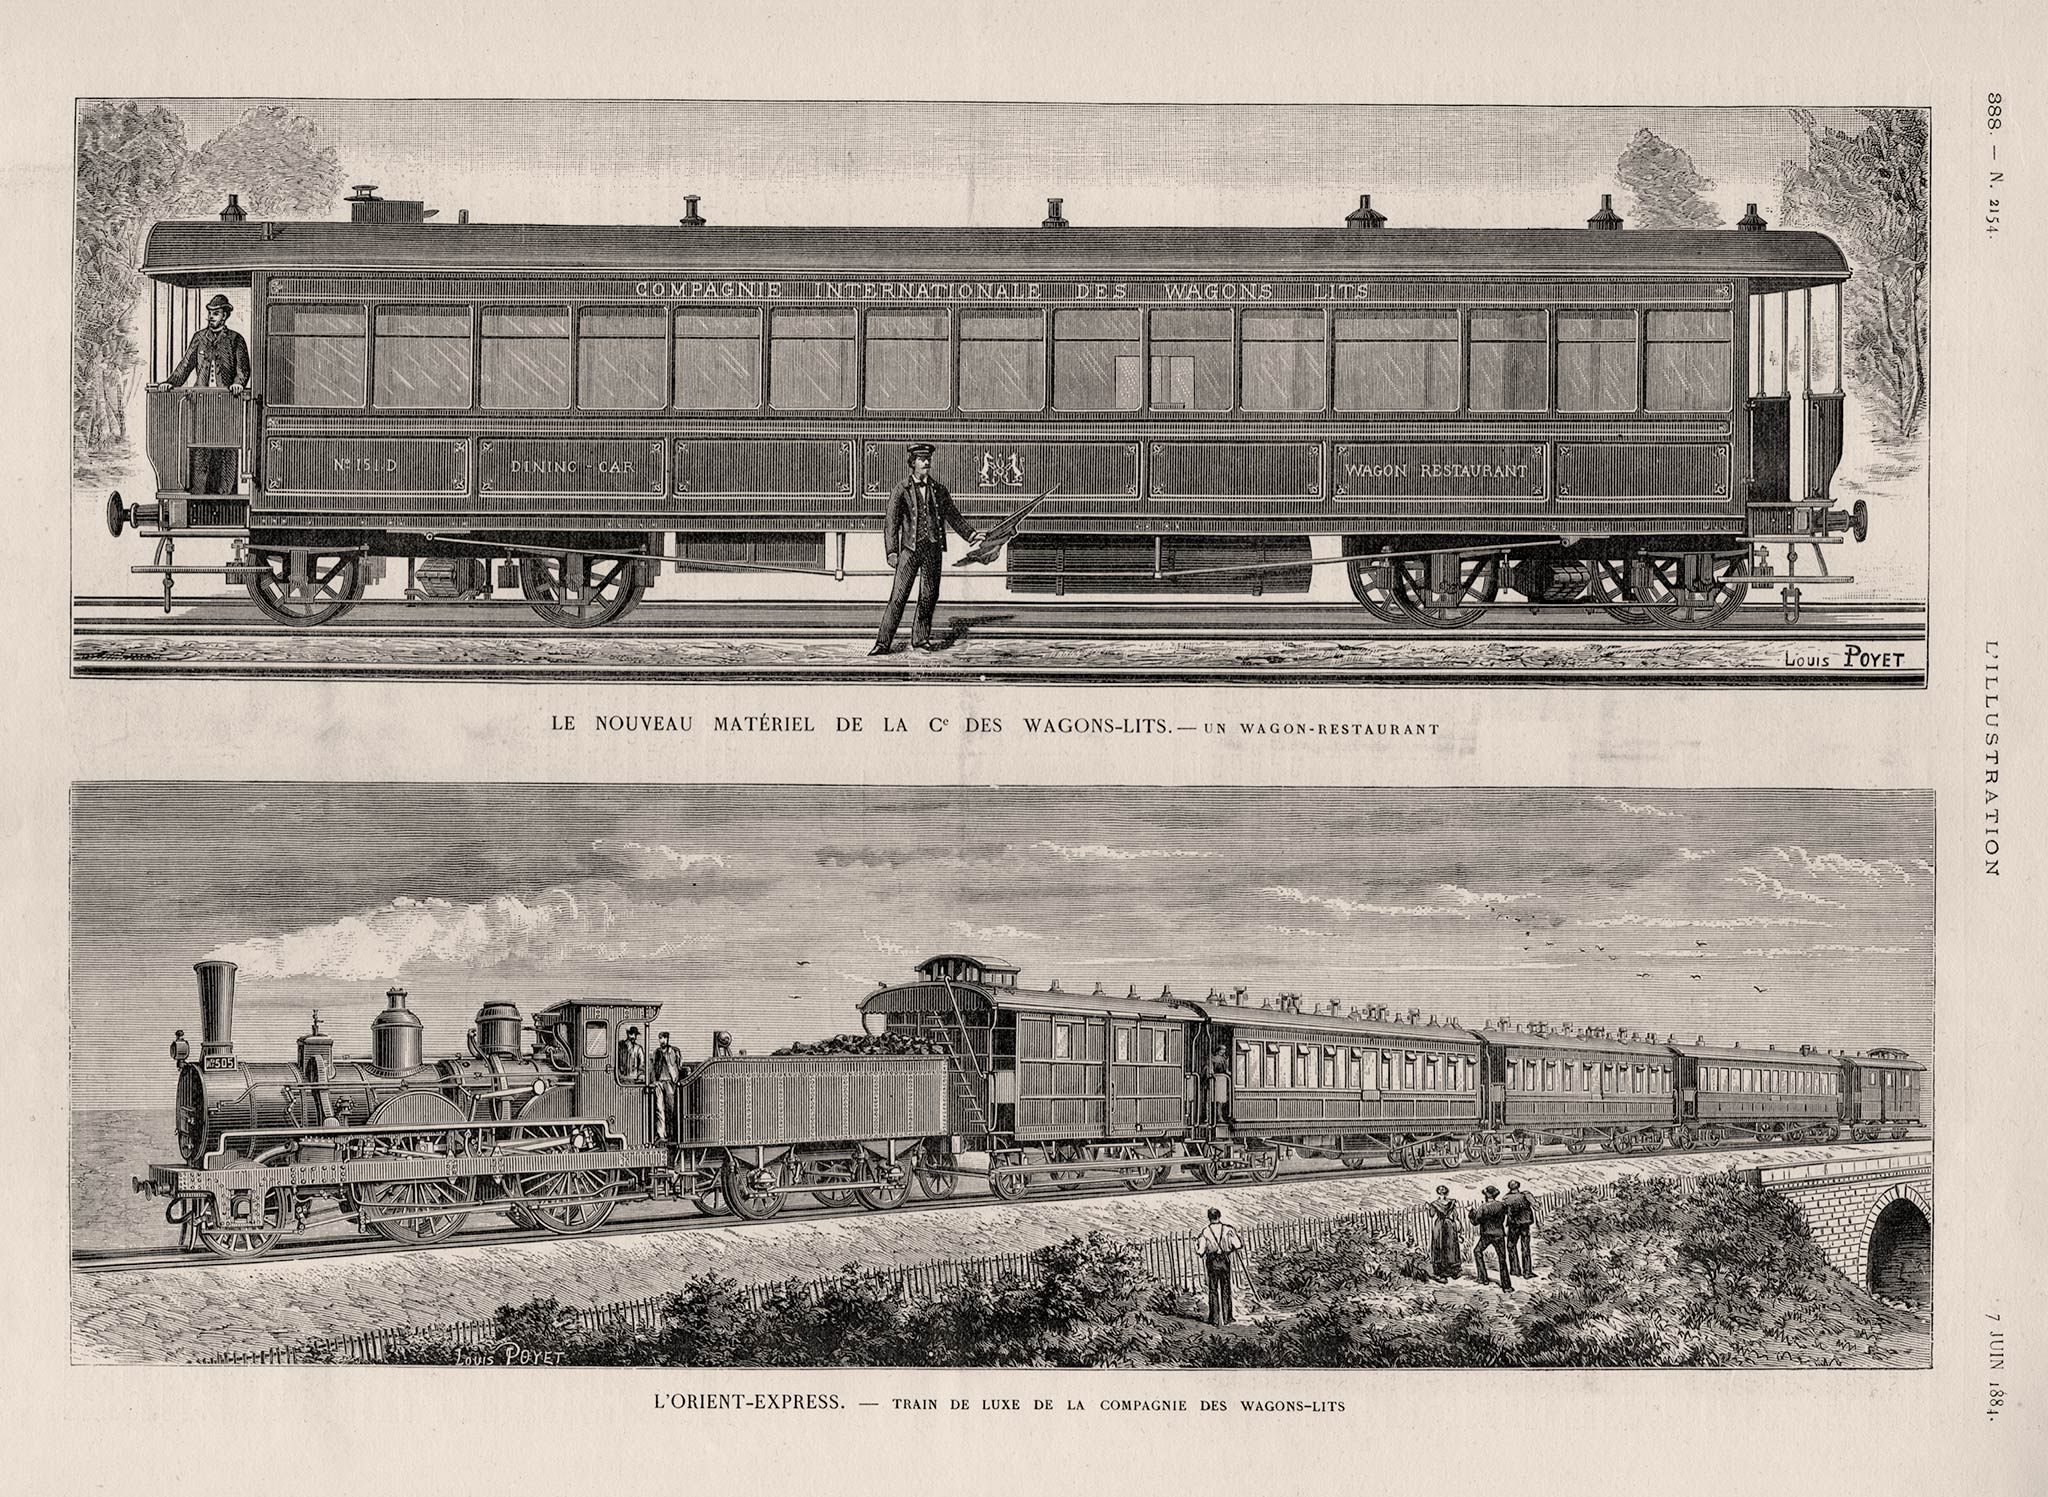 Why Is the Orient Express So Famous?